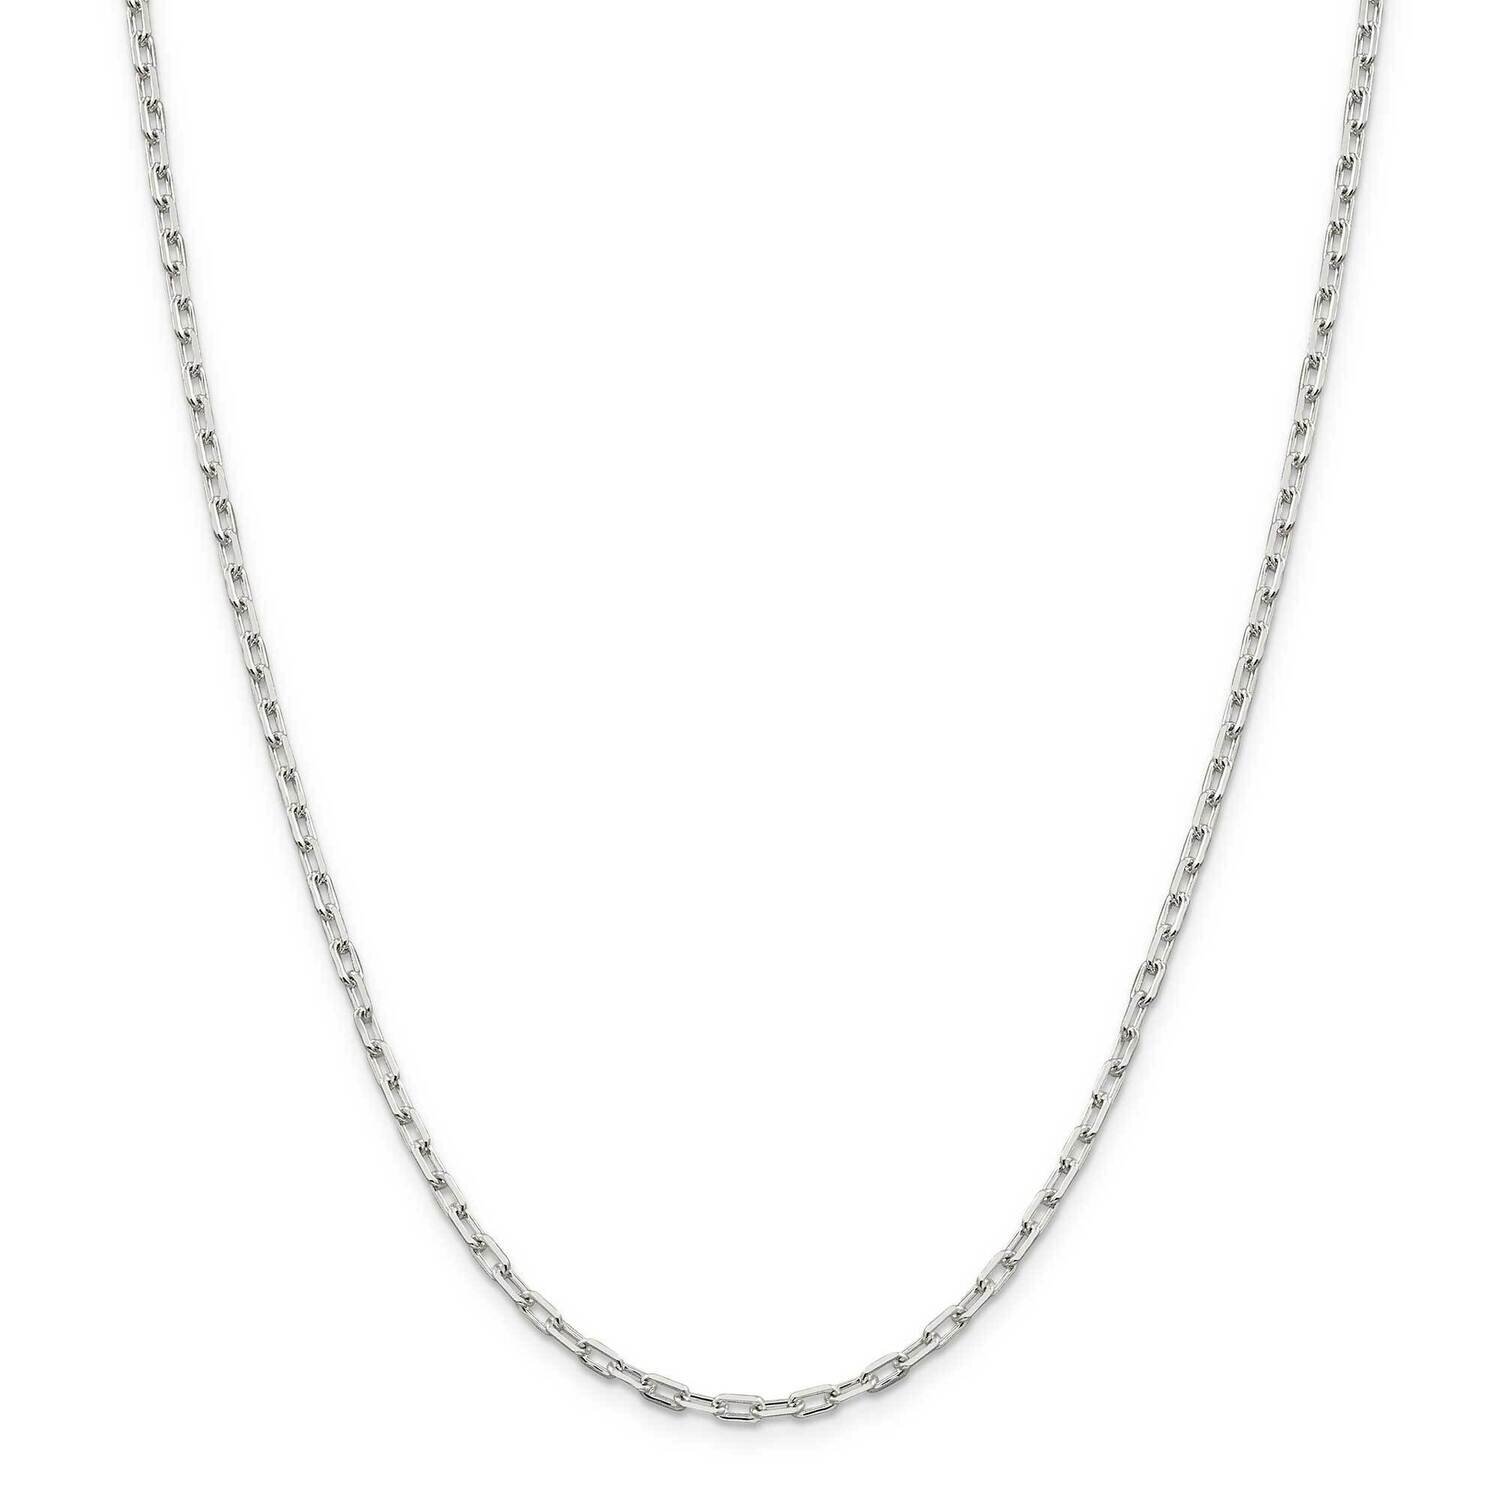 2.75mm Elongated Open Link Chain 26 Inch Sterling Silver QFC52-26